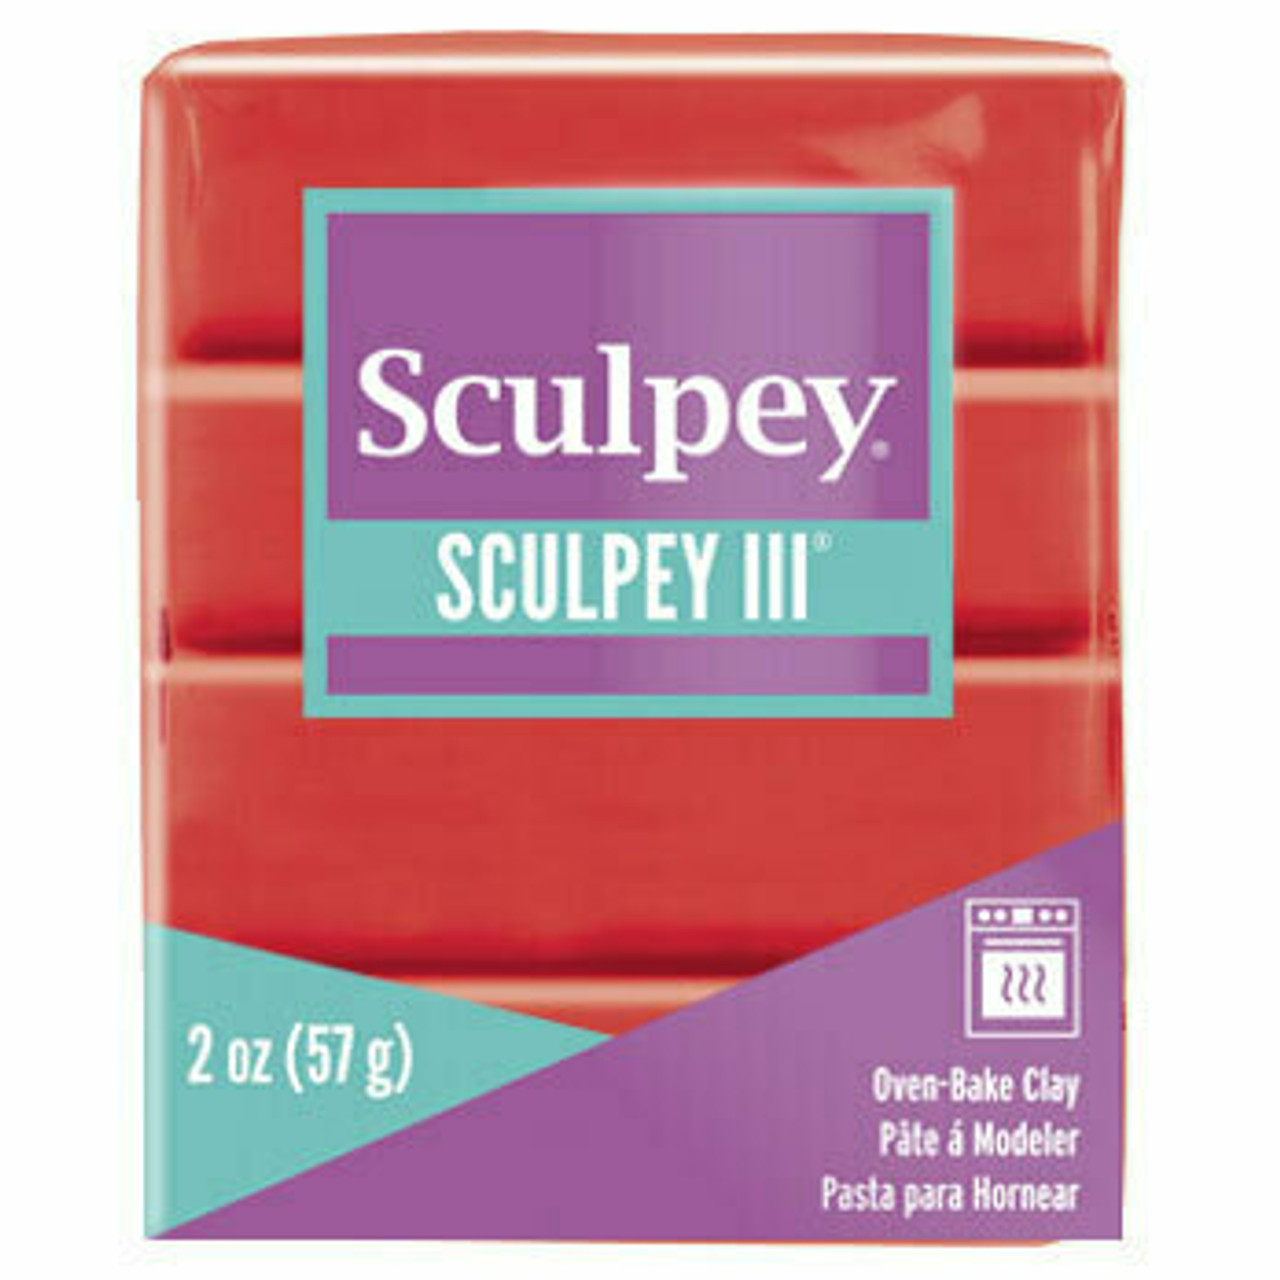 Sculpey III Red Hot Red 2oz (57g)